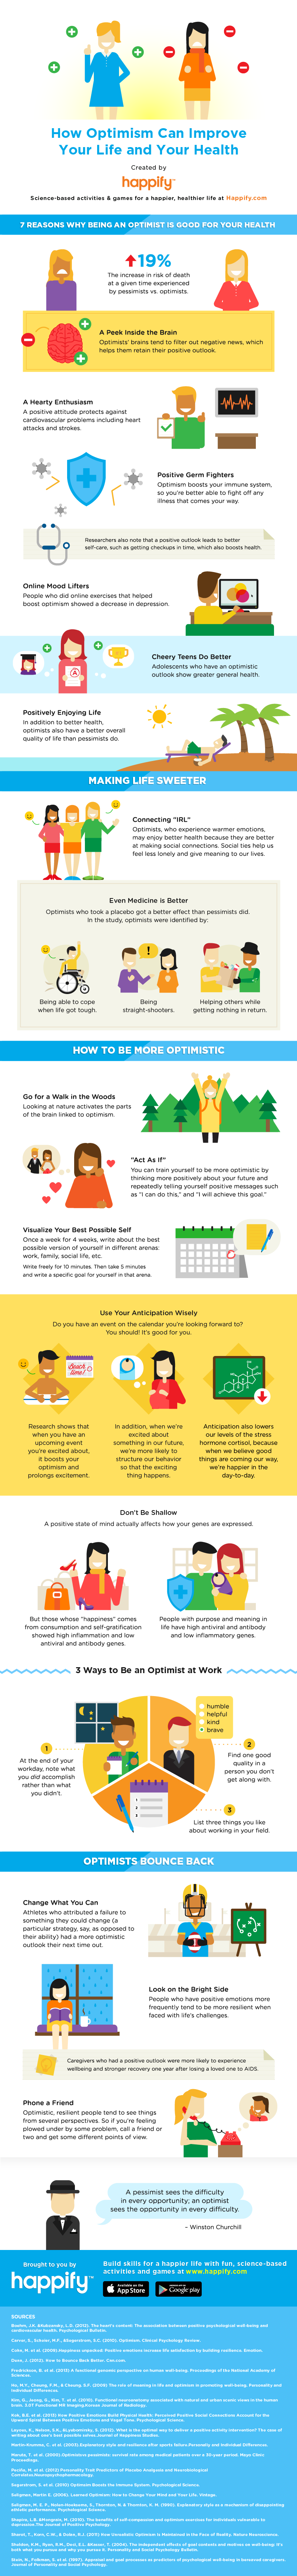 Infographic: Why Being More Optimistic Can Give You a Health (and Life)  Boost | by Happify Health | The Daily Pursuit by Happify Health